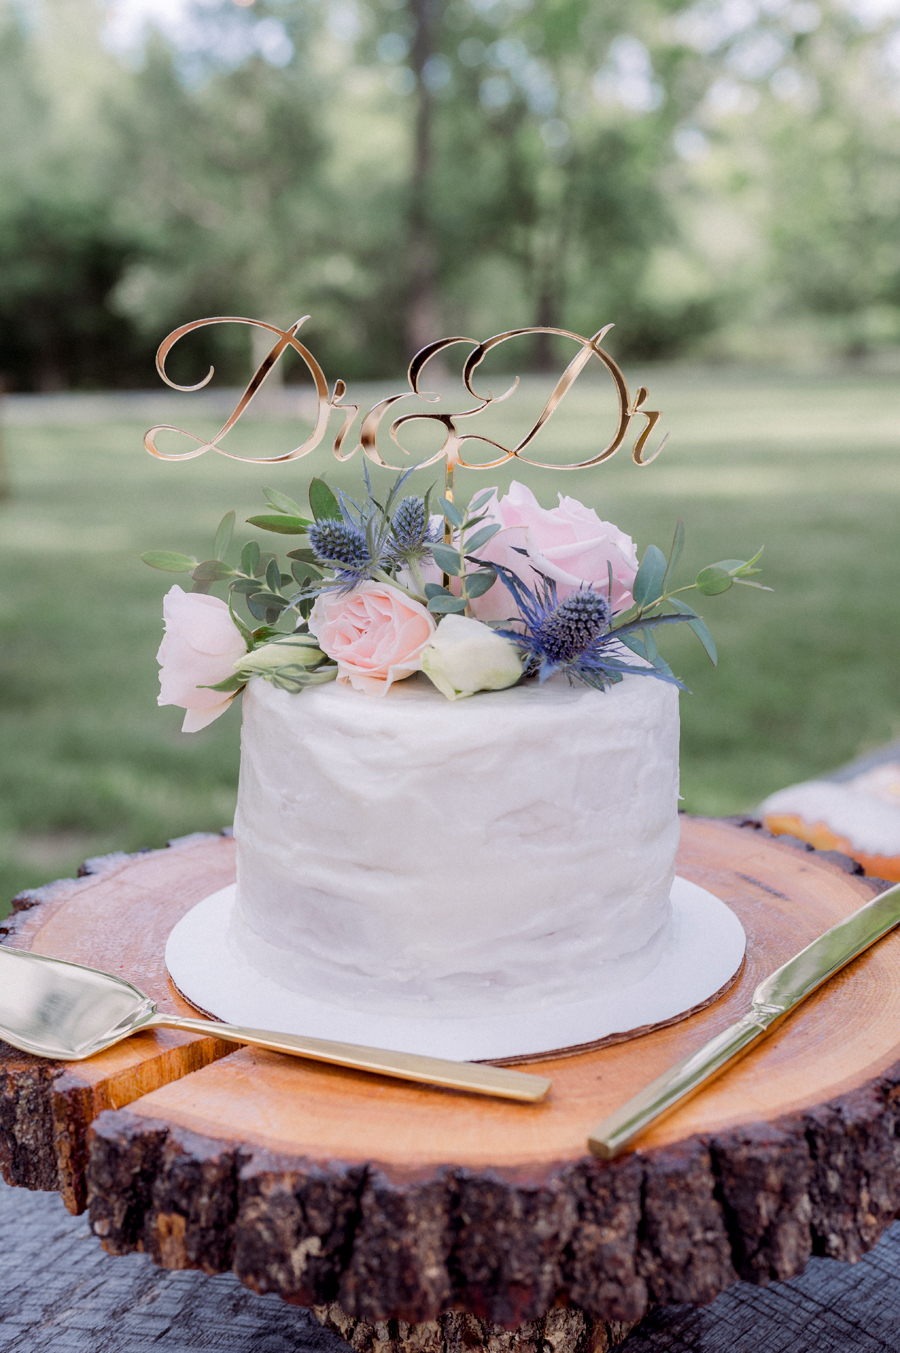 Reception details at a Missouri wedding at Wildcliff Weddings and Events.